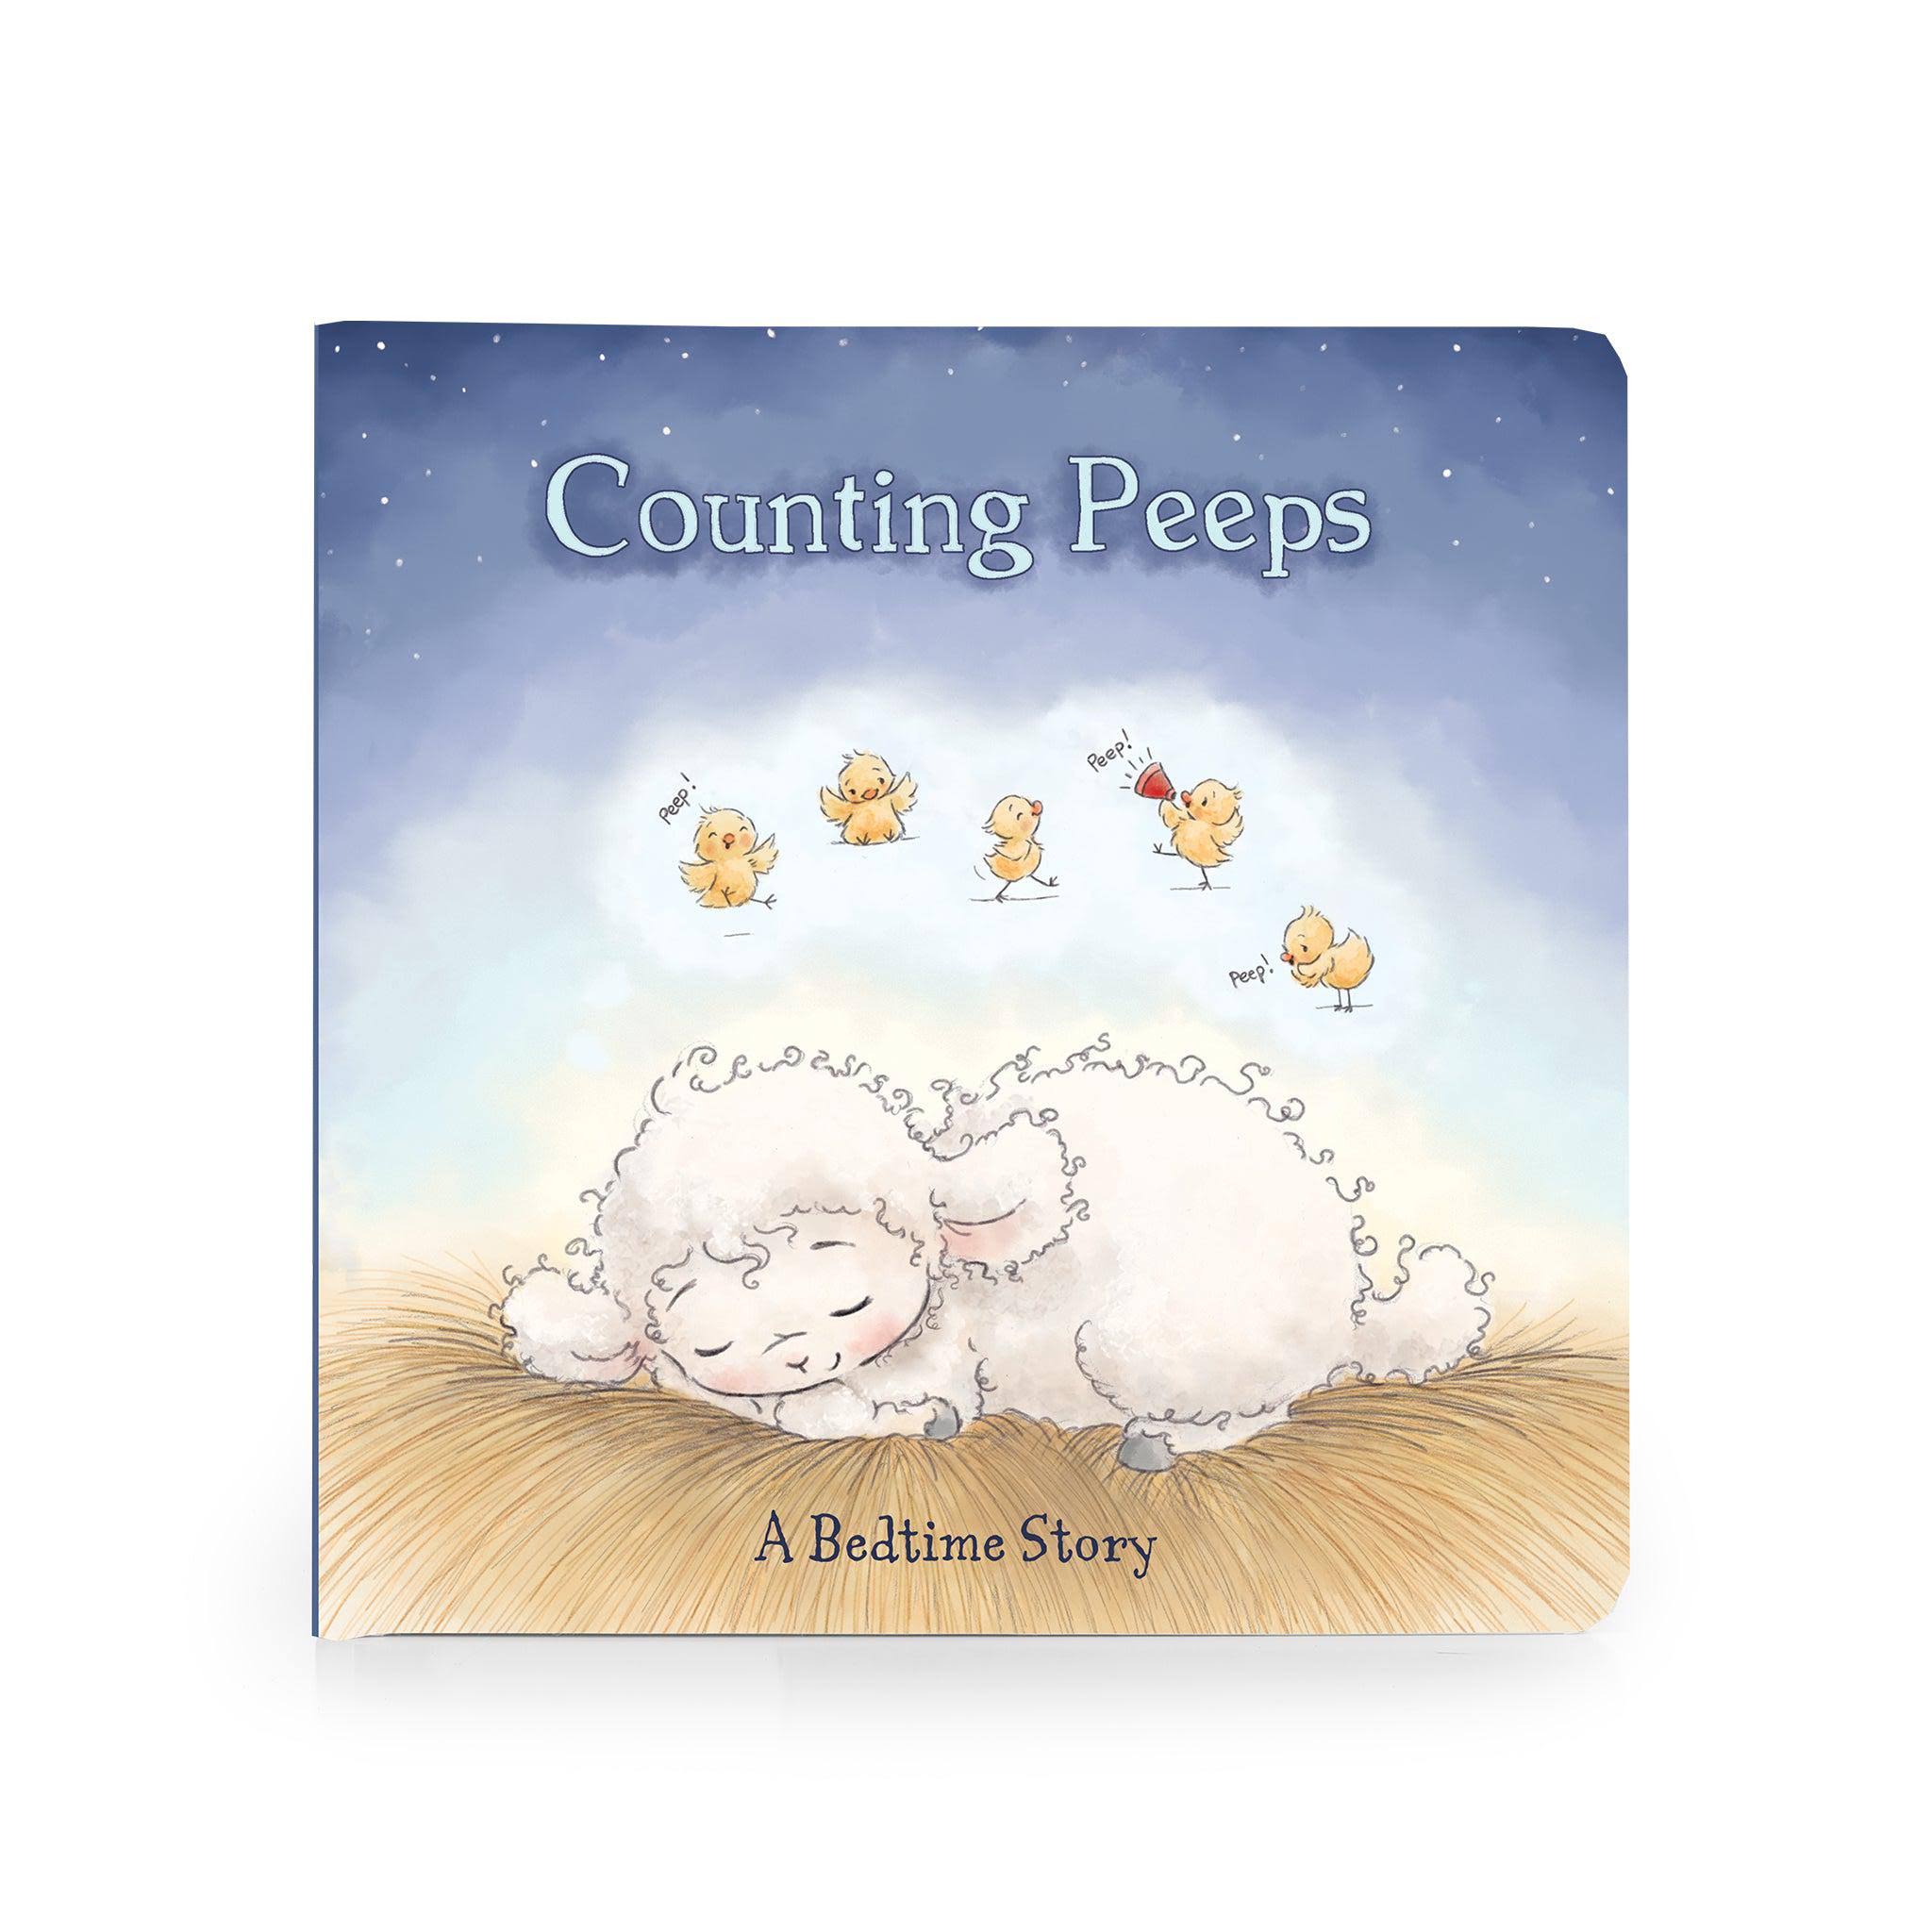 Bunnies by the bay Counting Peeps board book for babies and kids